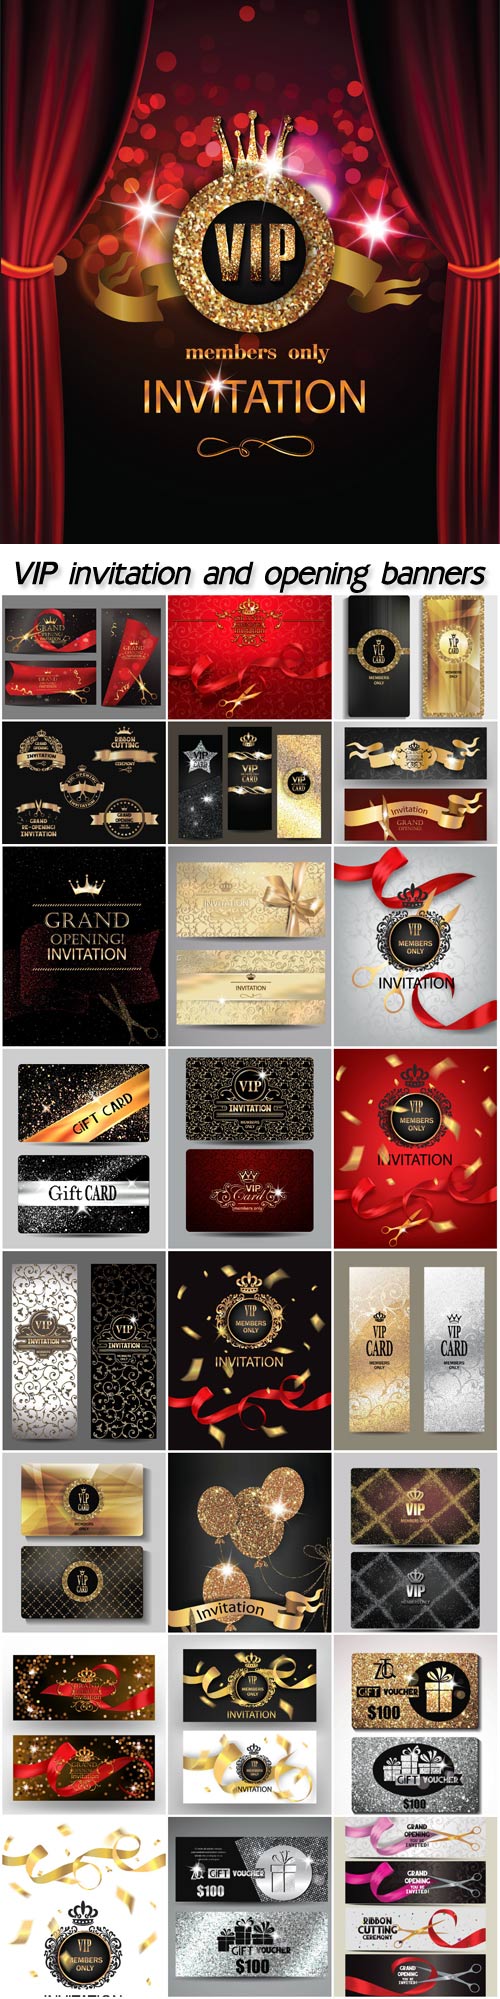 Set of grand opening banners with red ribbons and gold scissors, VIP invitation, business cards